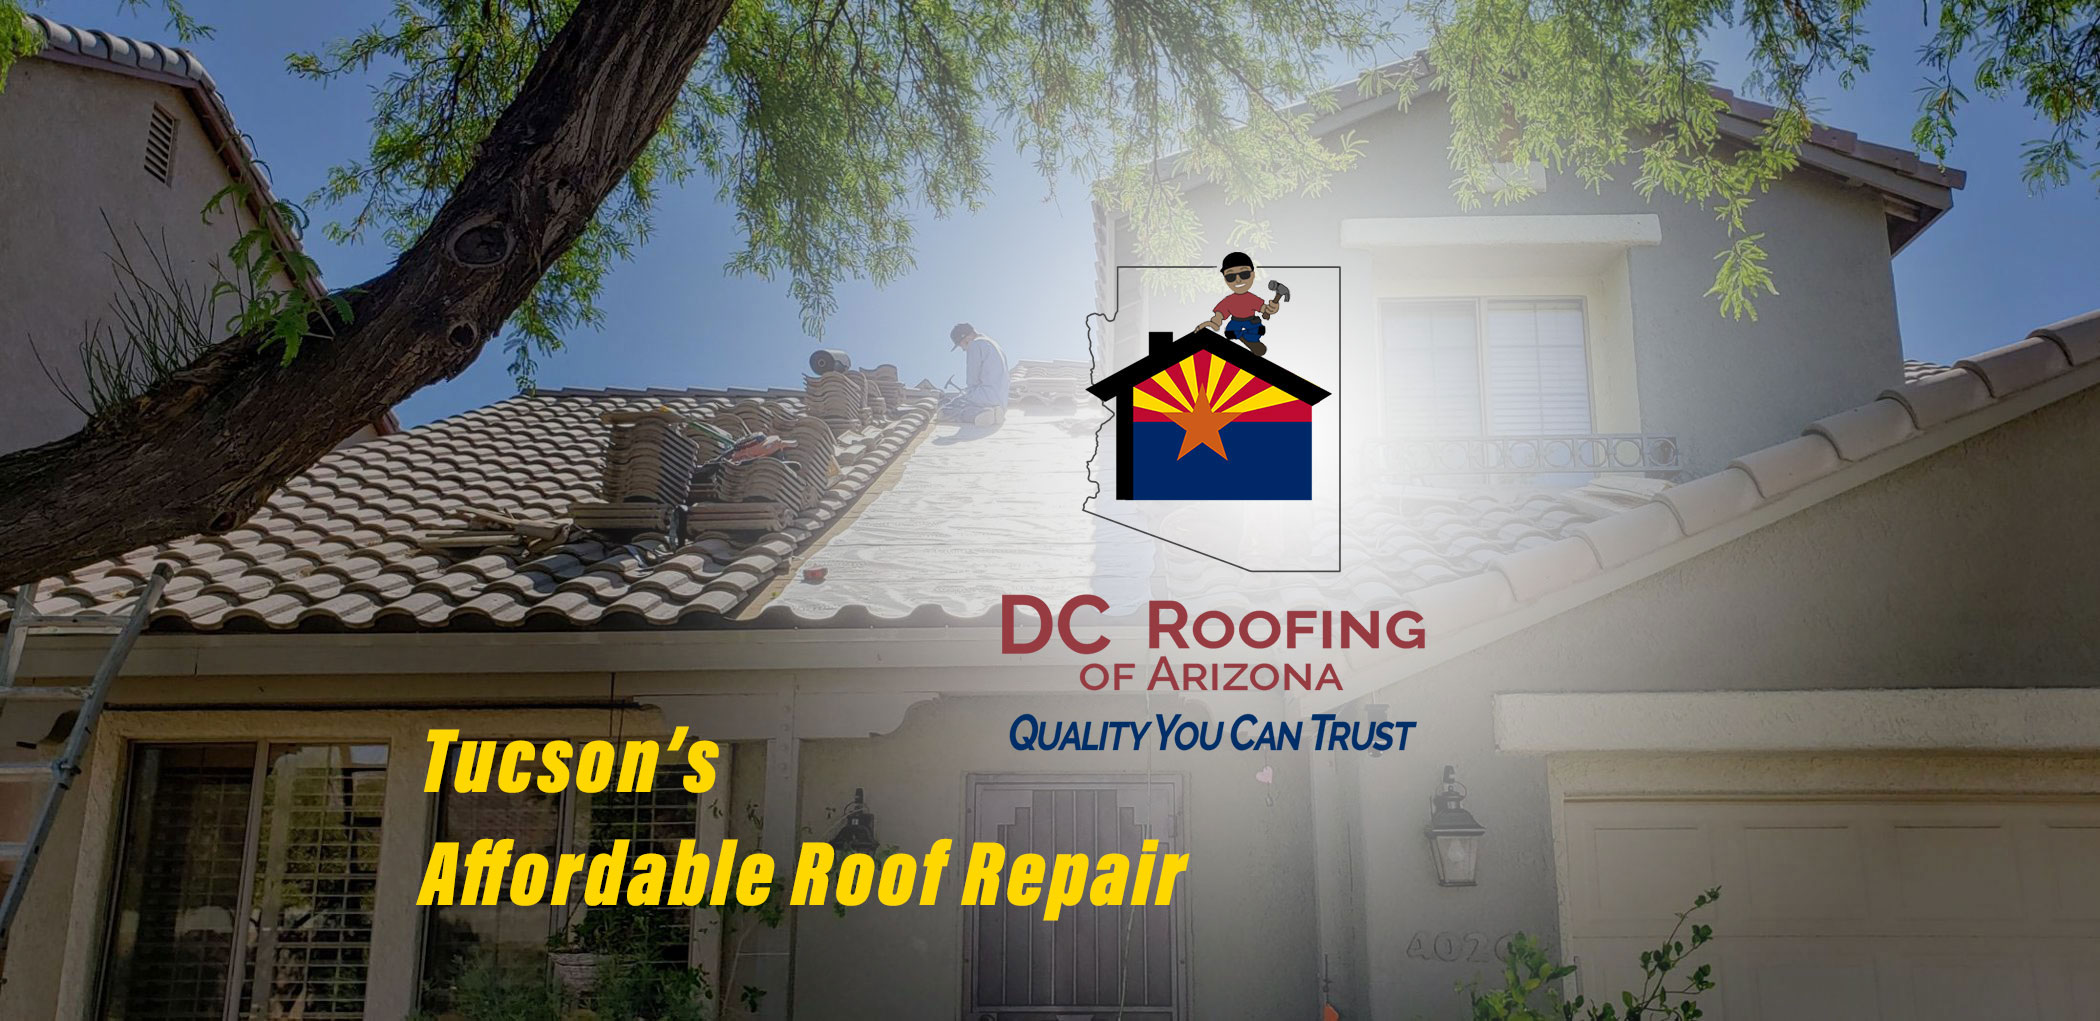 Tucson's Affordable Roof Repair Company, DC Roofing, at work fixing a tile roof